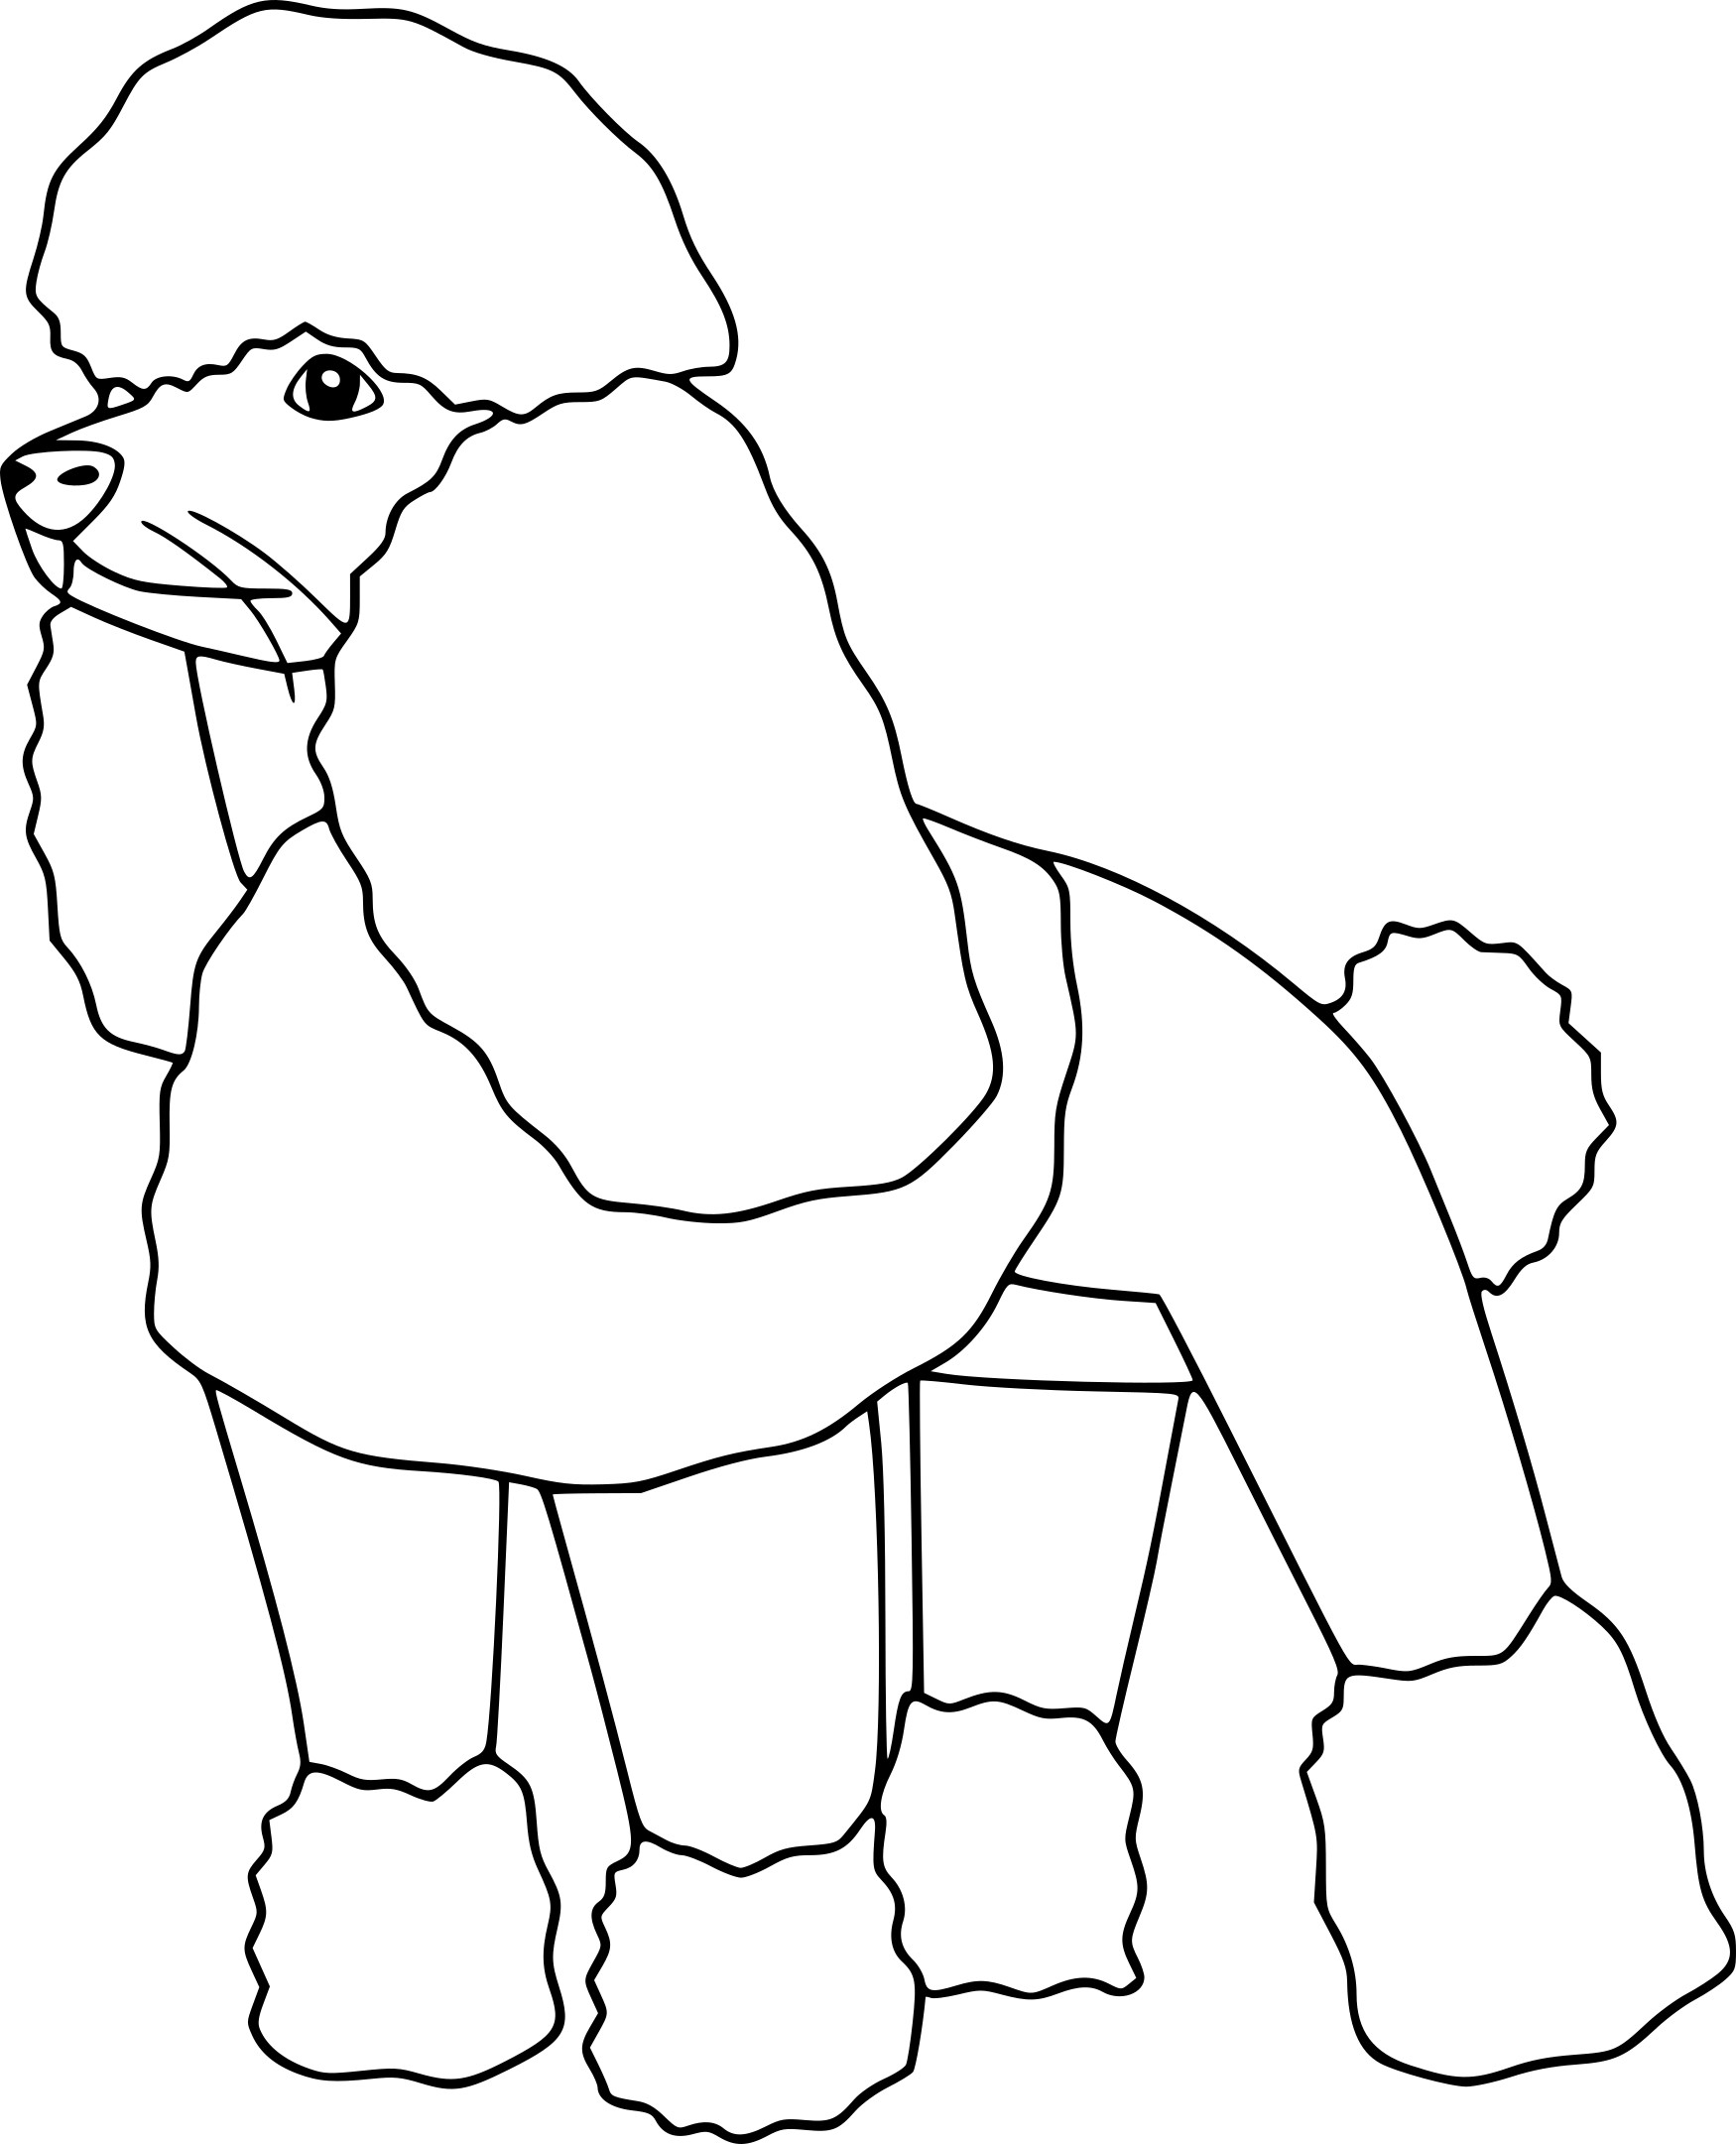 Poodle Dog coloring page